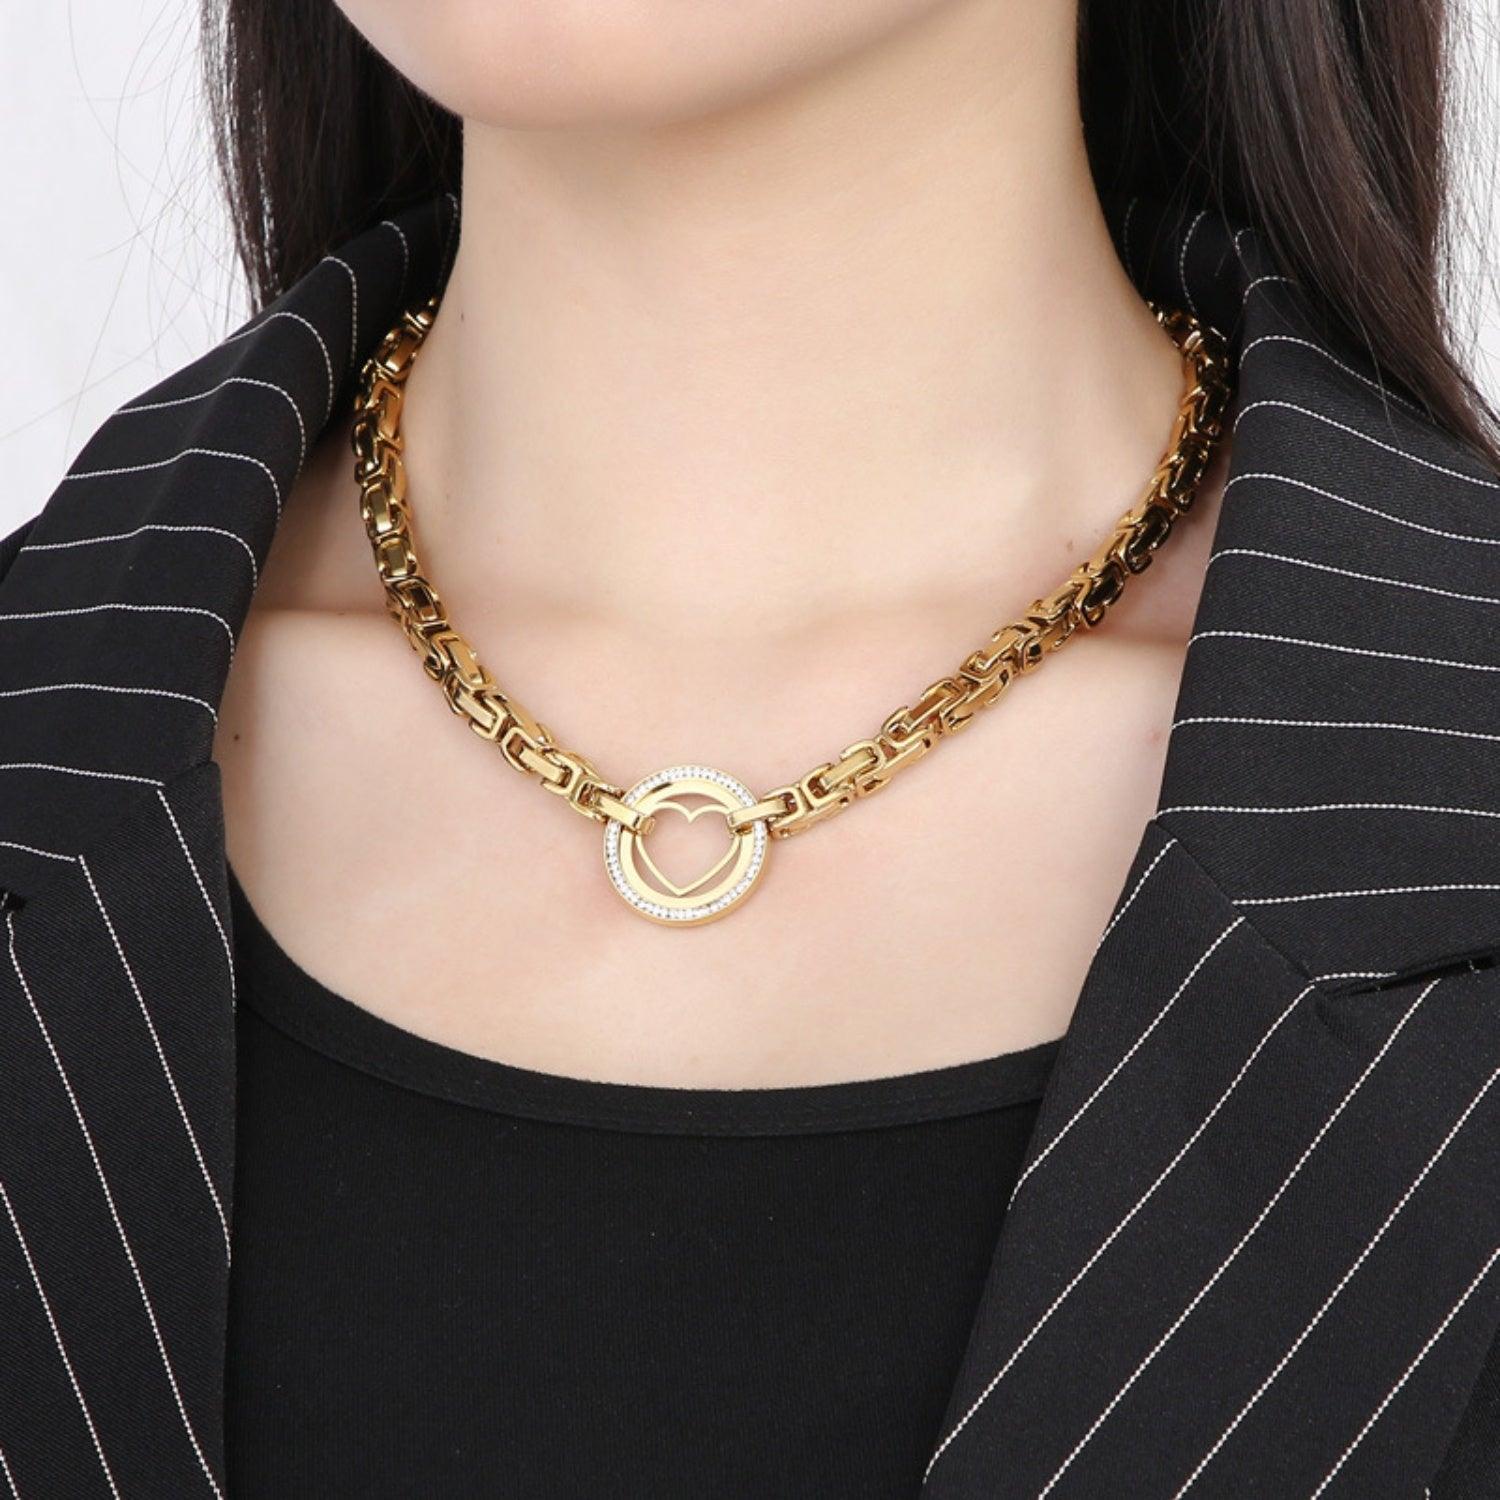 a woman wearing a black and white striped jacket and a gold chain necklace